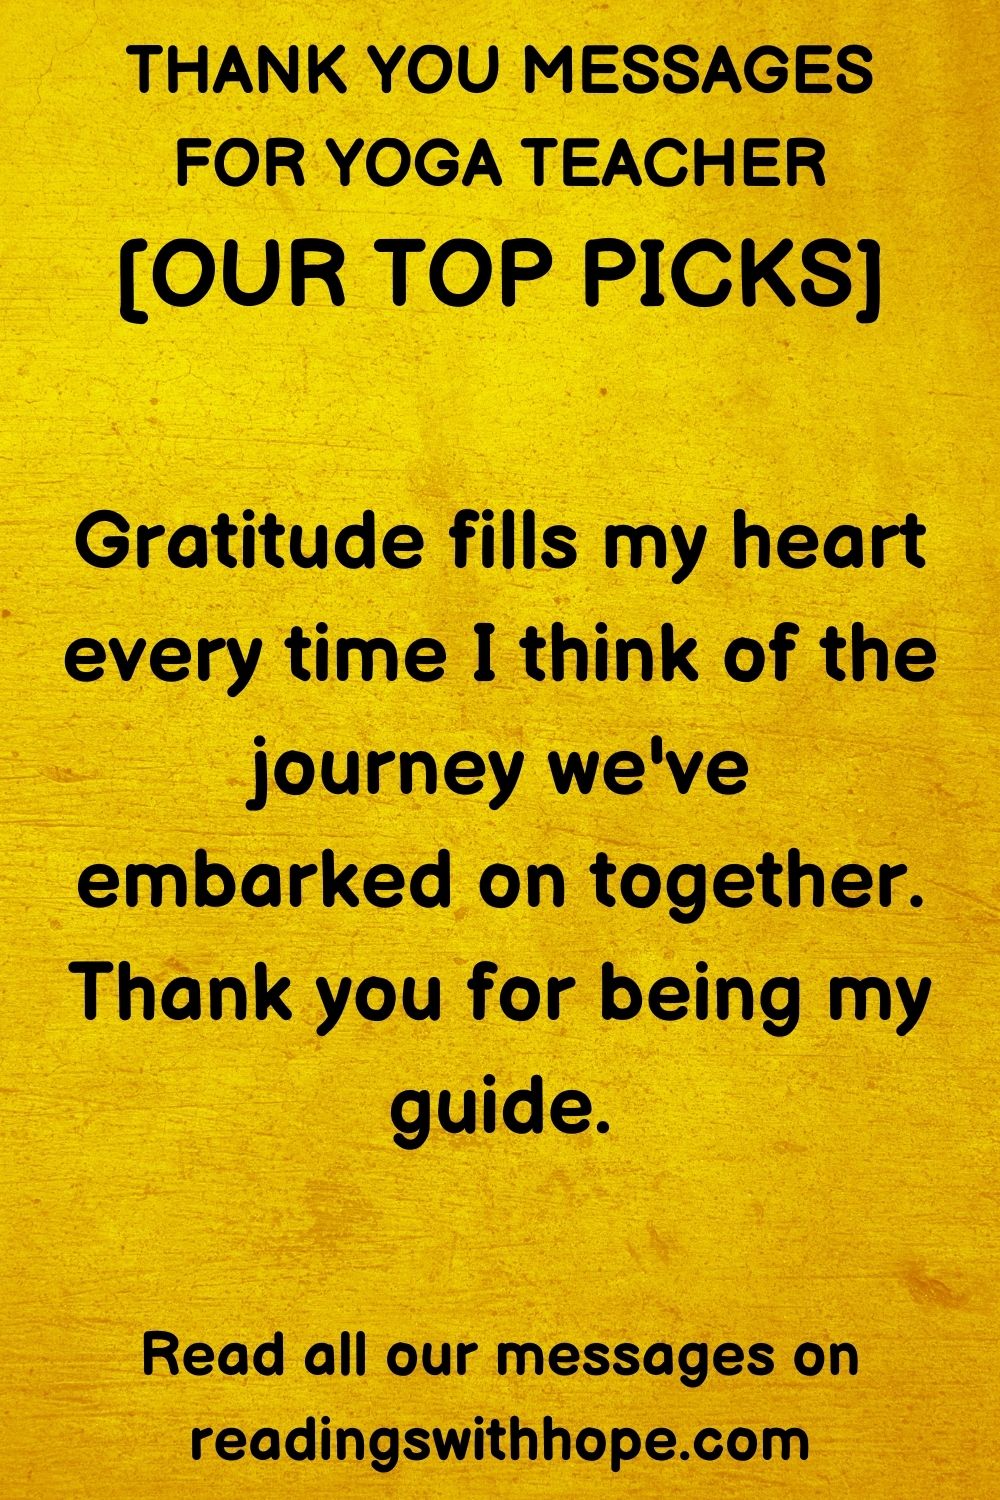 thank you note for yoga teacher that says Gratitude fills my heart every time I think of the journey we've embarked on together. Thank you for being my guide.